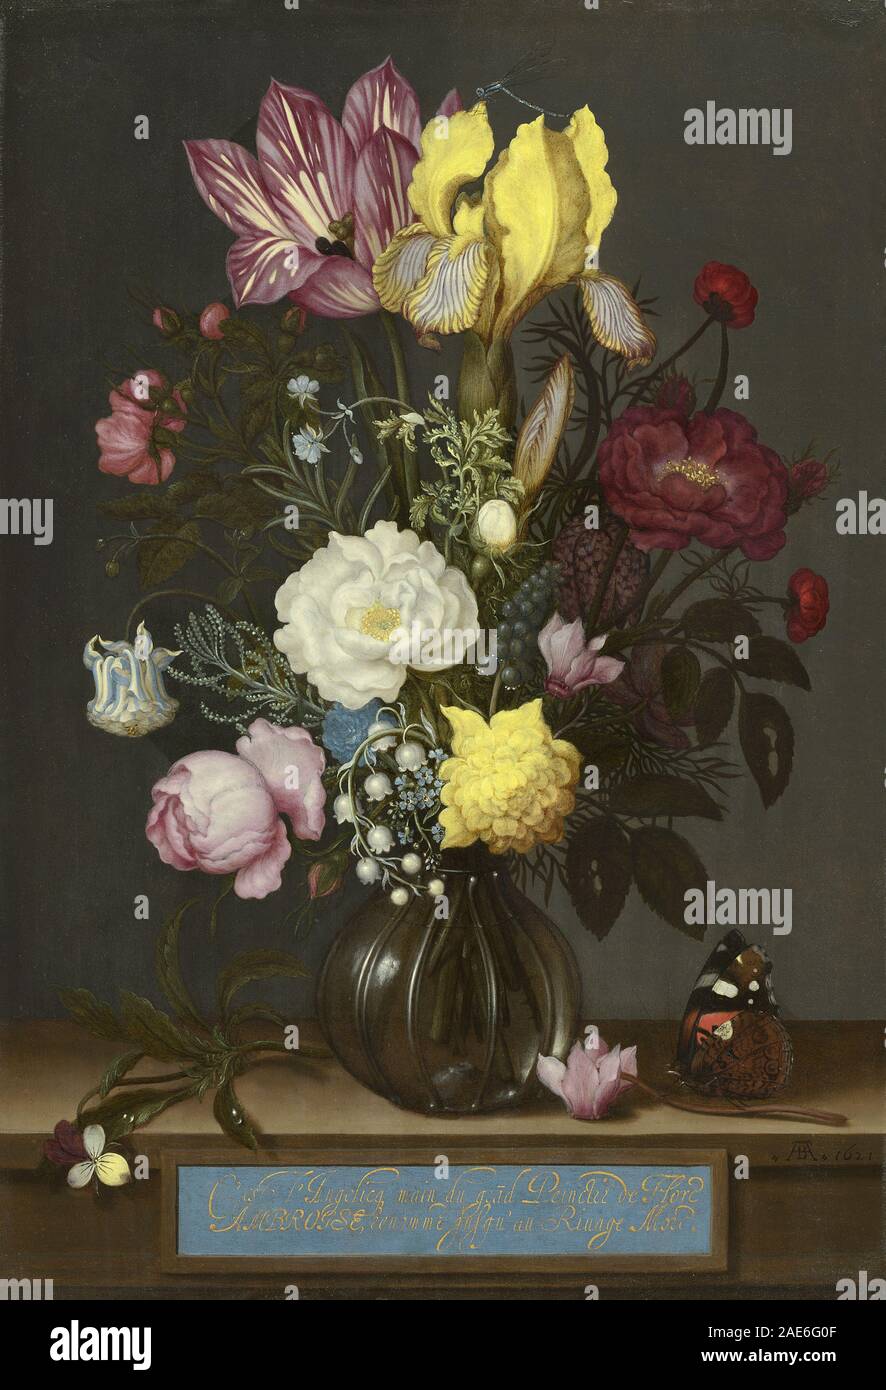 Bouquet of Flowers in a Glass Vase; 1621date Ambrosius Bosschaert, Bouquet of Flowers in a Glass Vase, 1621 Stock Photo